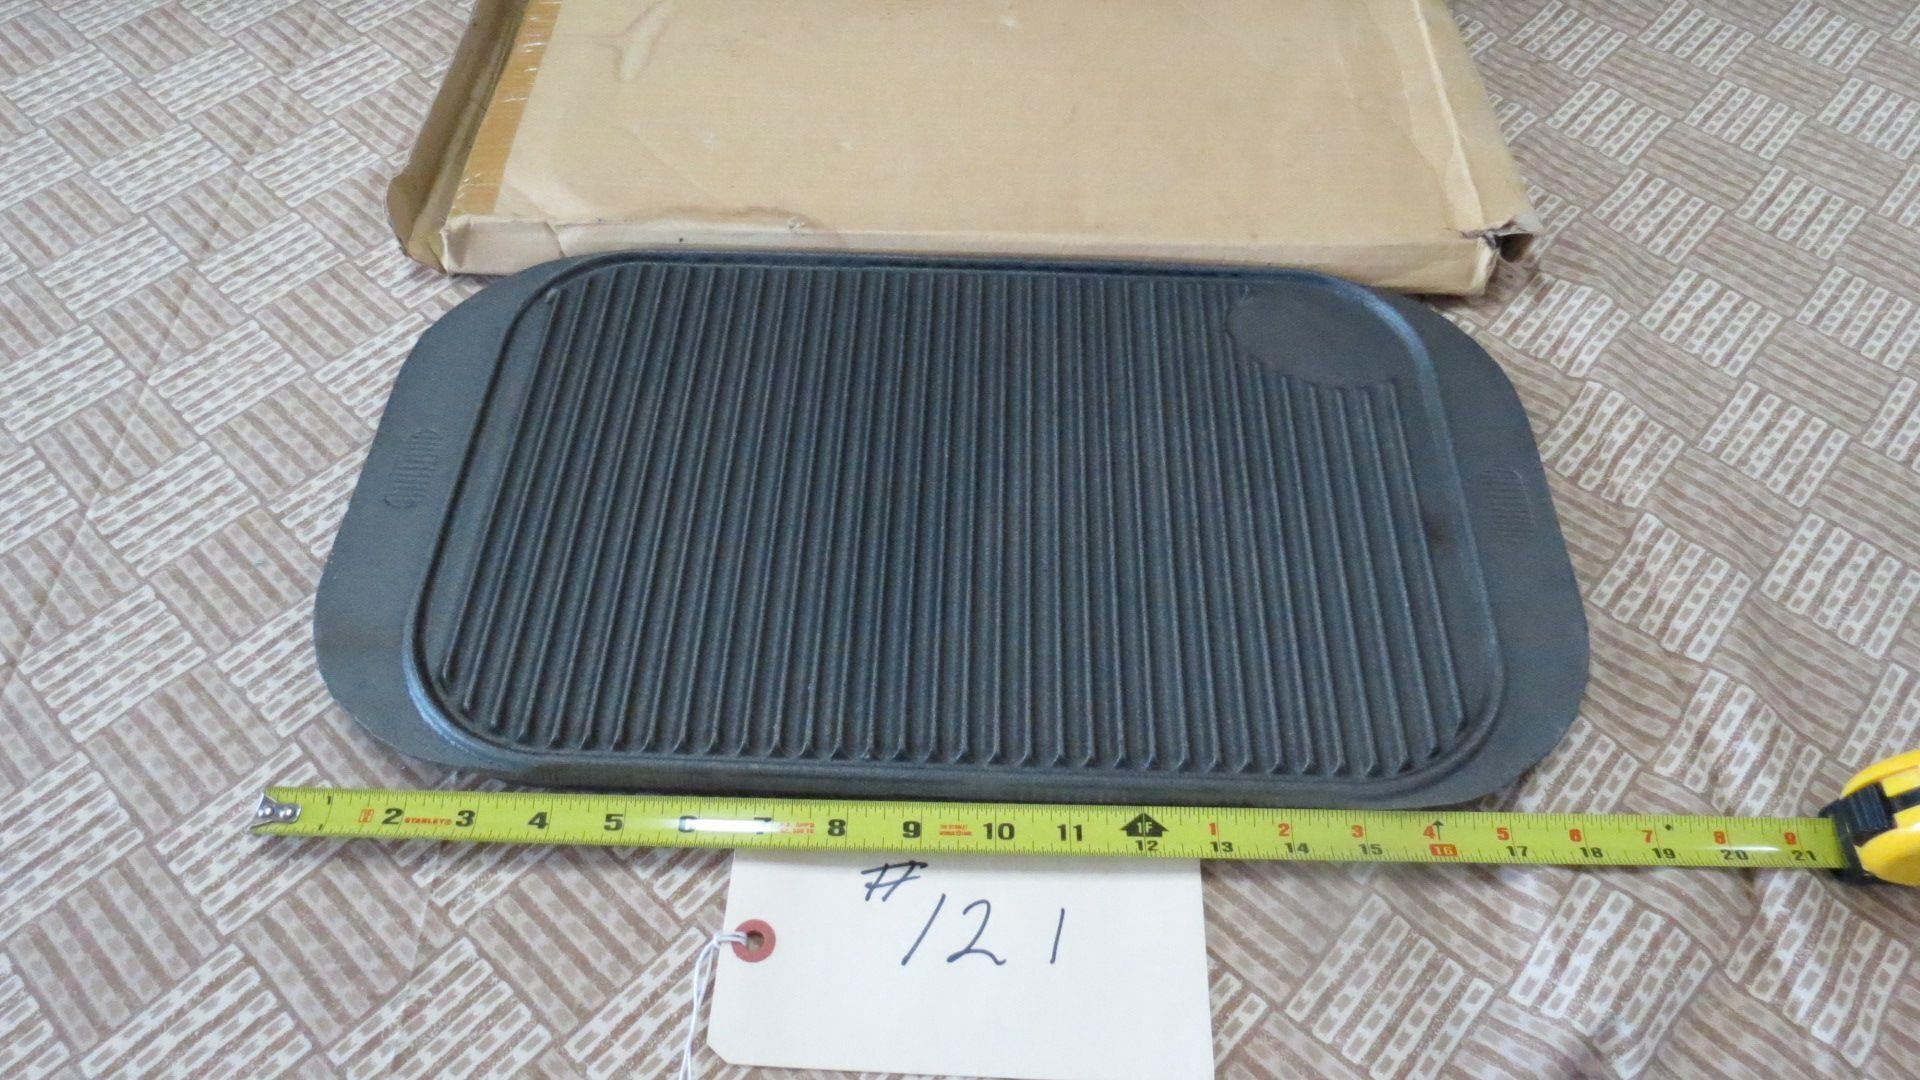 DOUBLE SIDED CAST GRILL TOP 19" X 10"